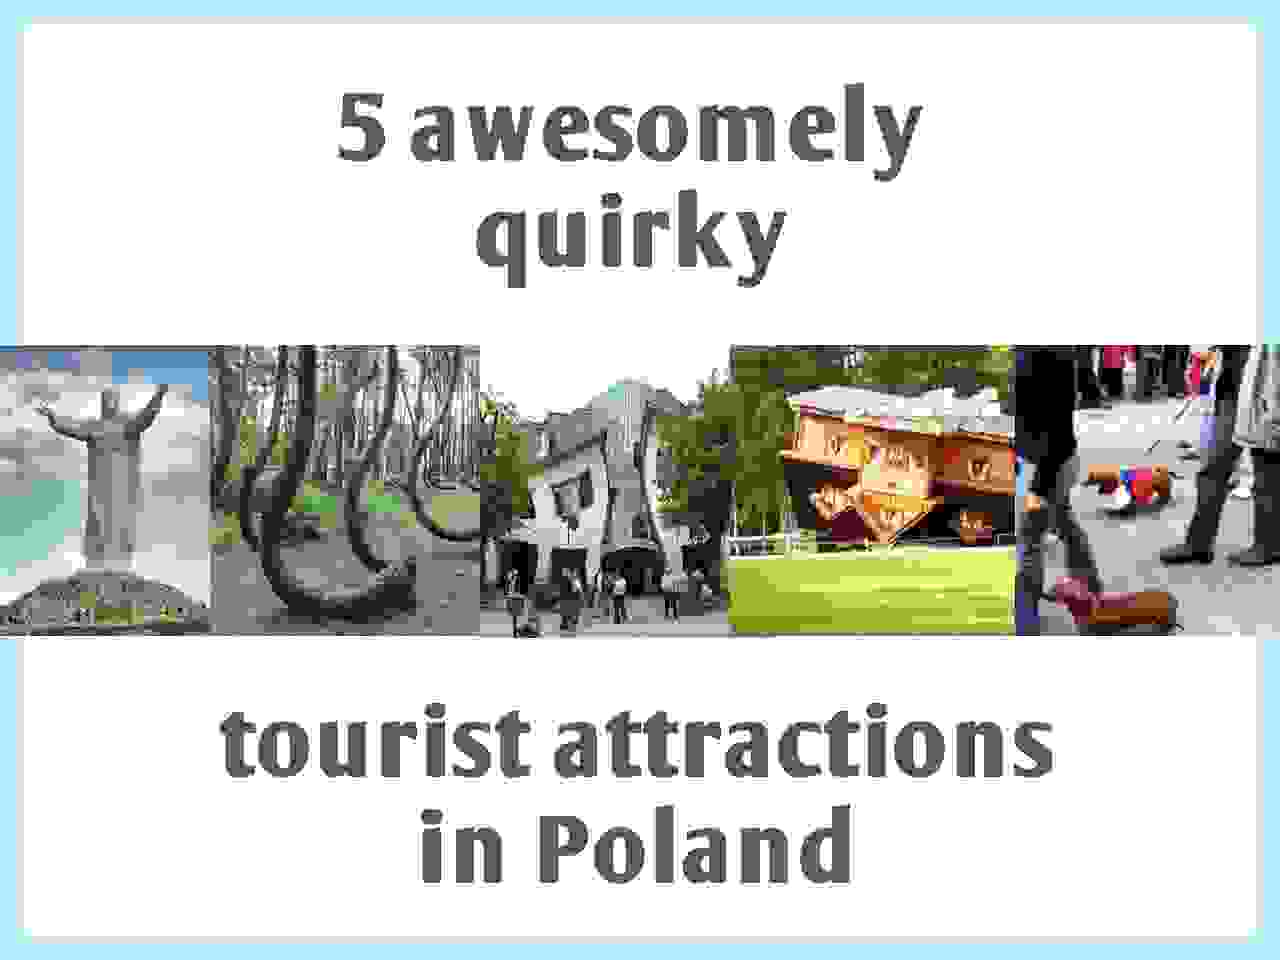 5 awesomely quirky tourist attractions in Poland